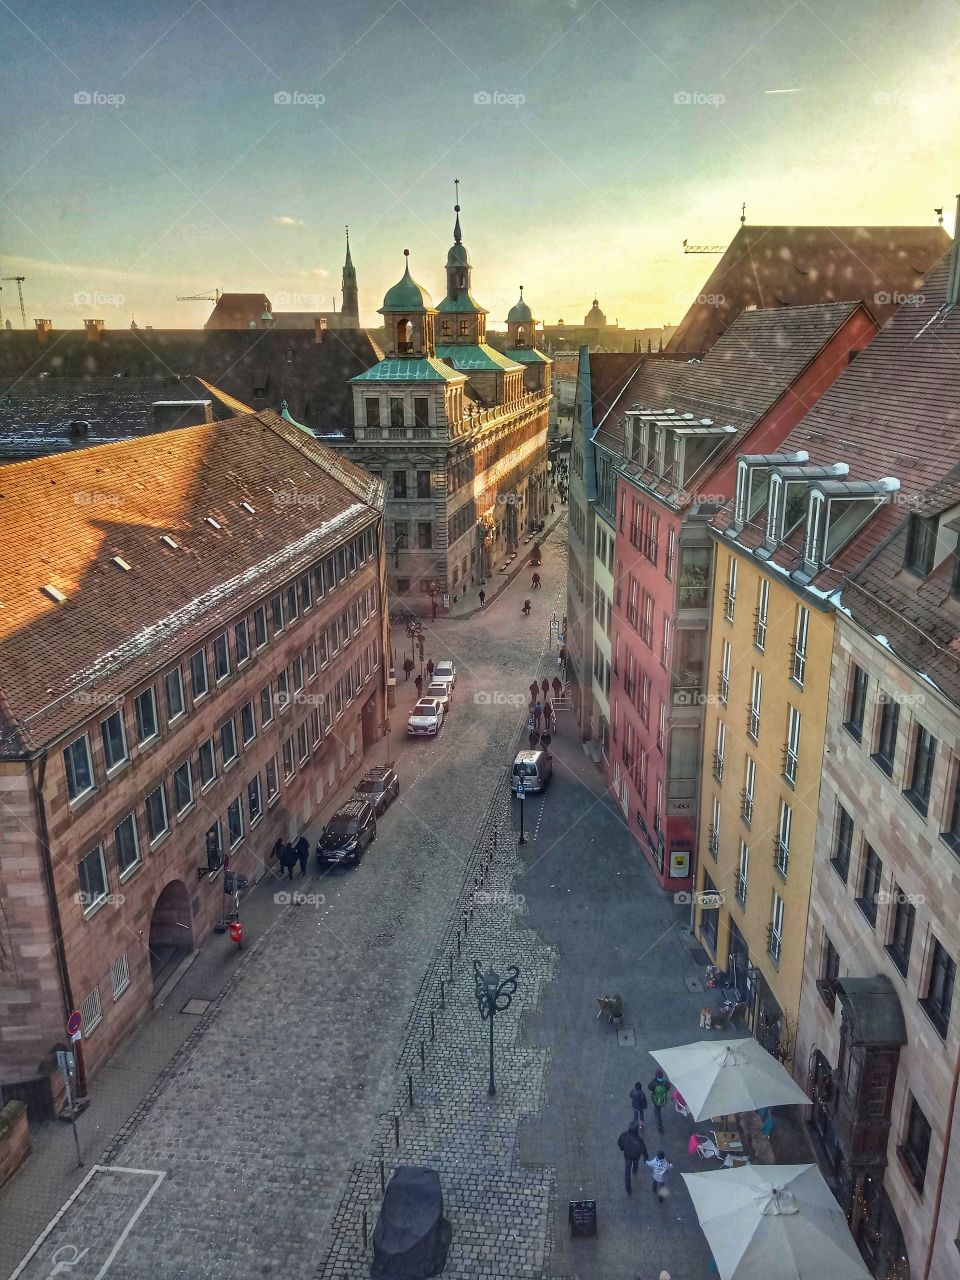 Nürnberg with view on the Rathaus